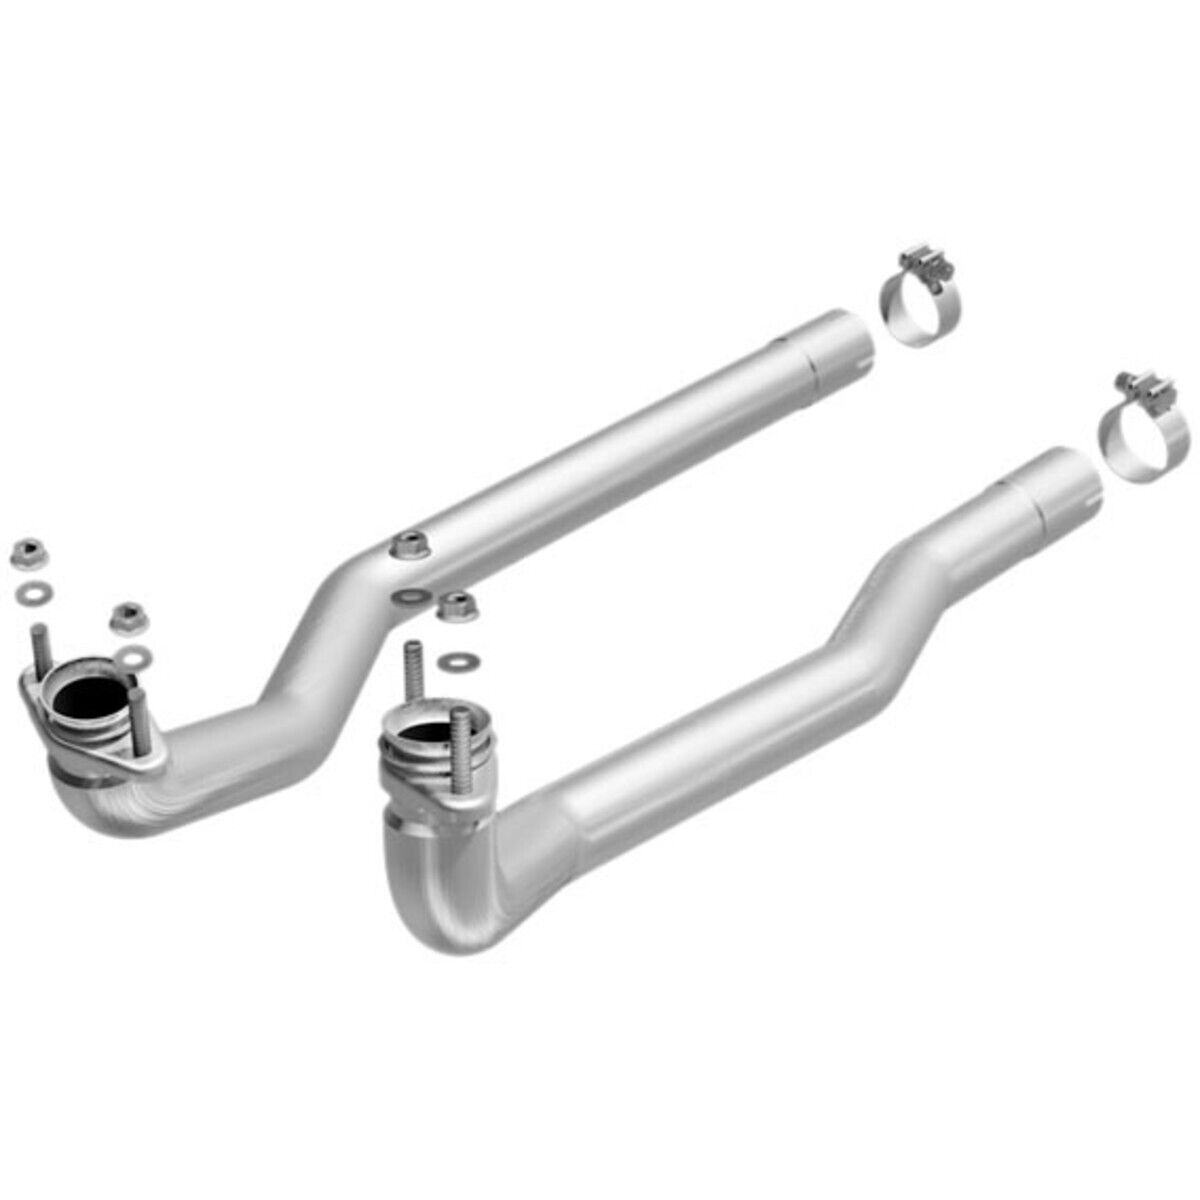 19343 Magnaflow Exhaust Pipes Set of 2 for Dodge Charger Dart Magnum Fury Pair